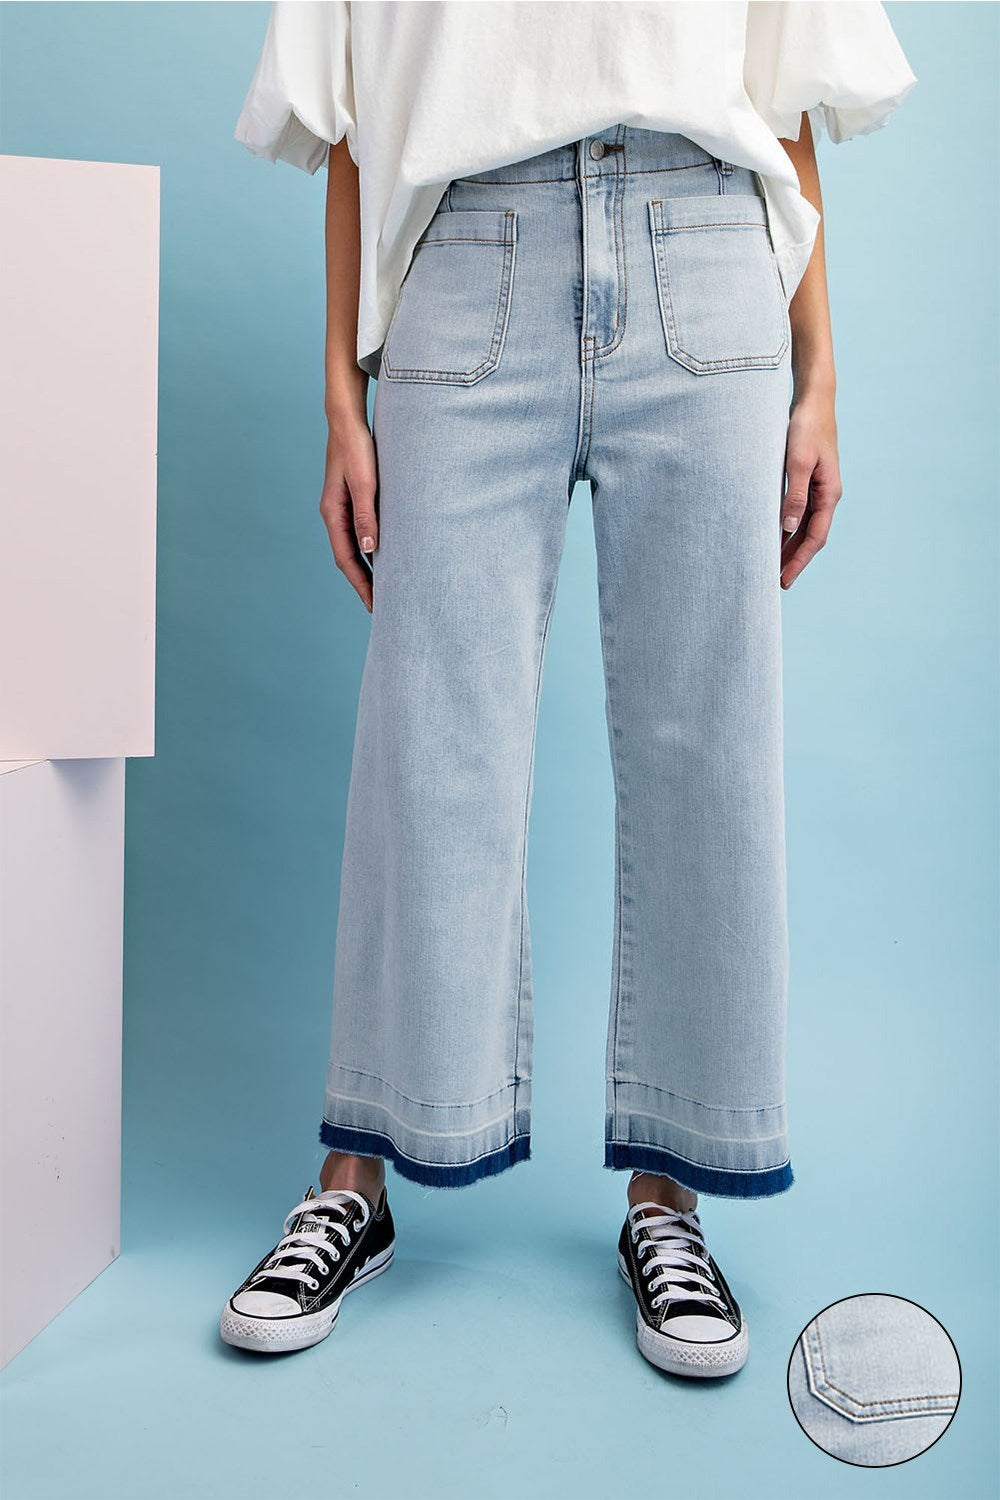 MINERAL WASHED DENIM CROPPED PANTS